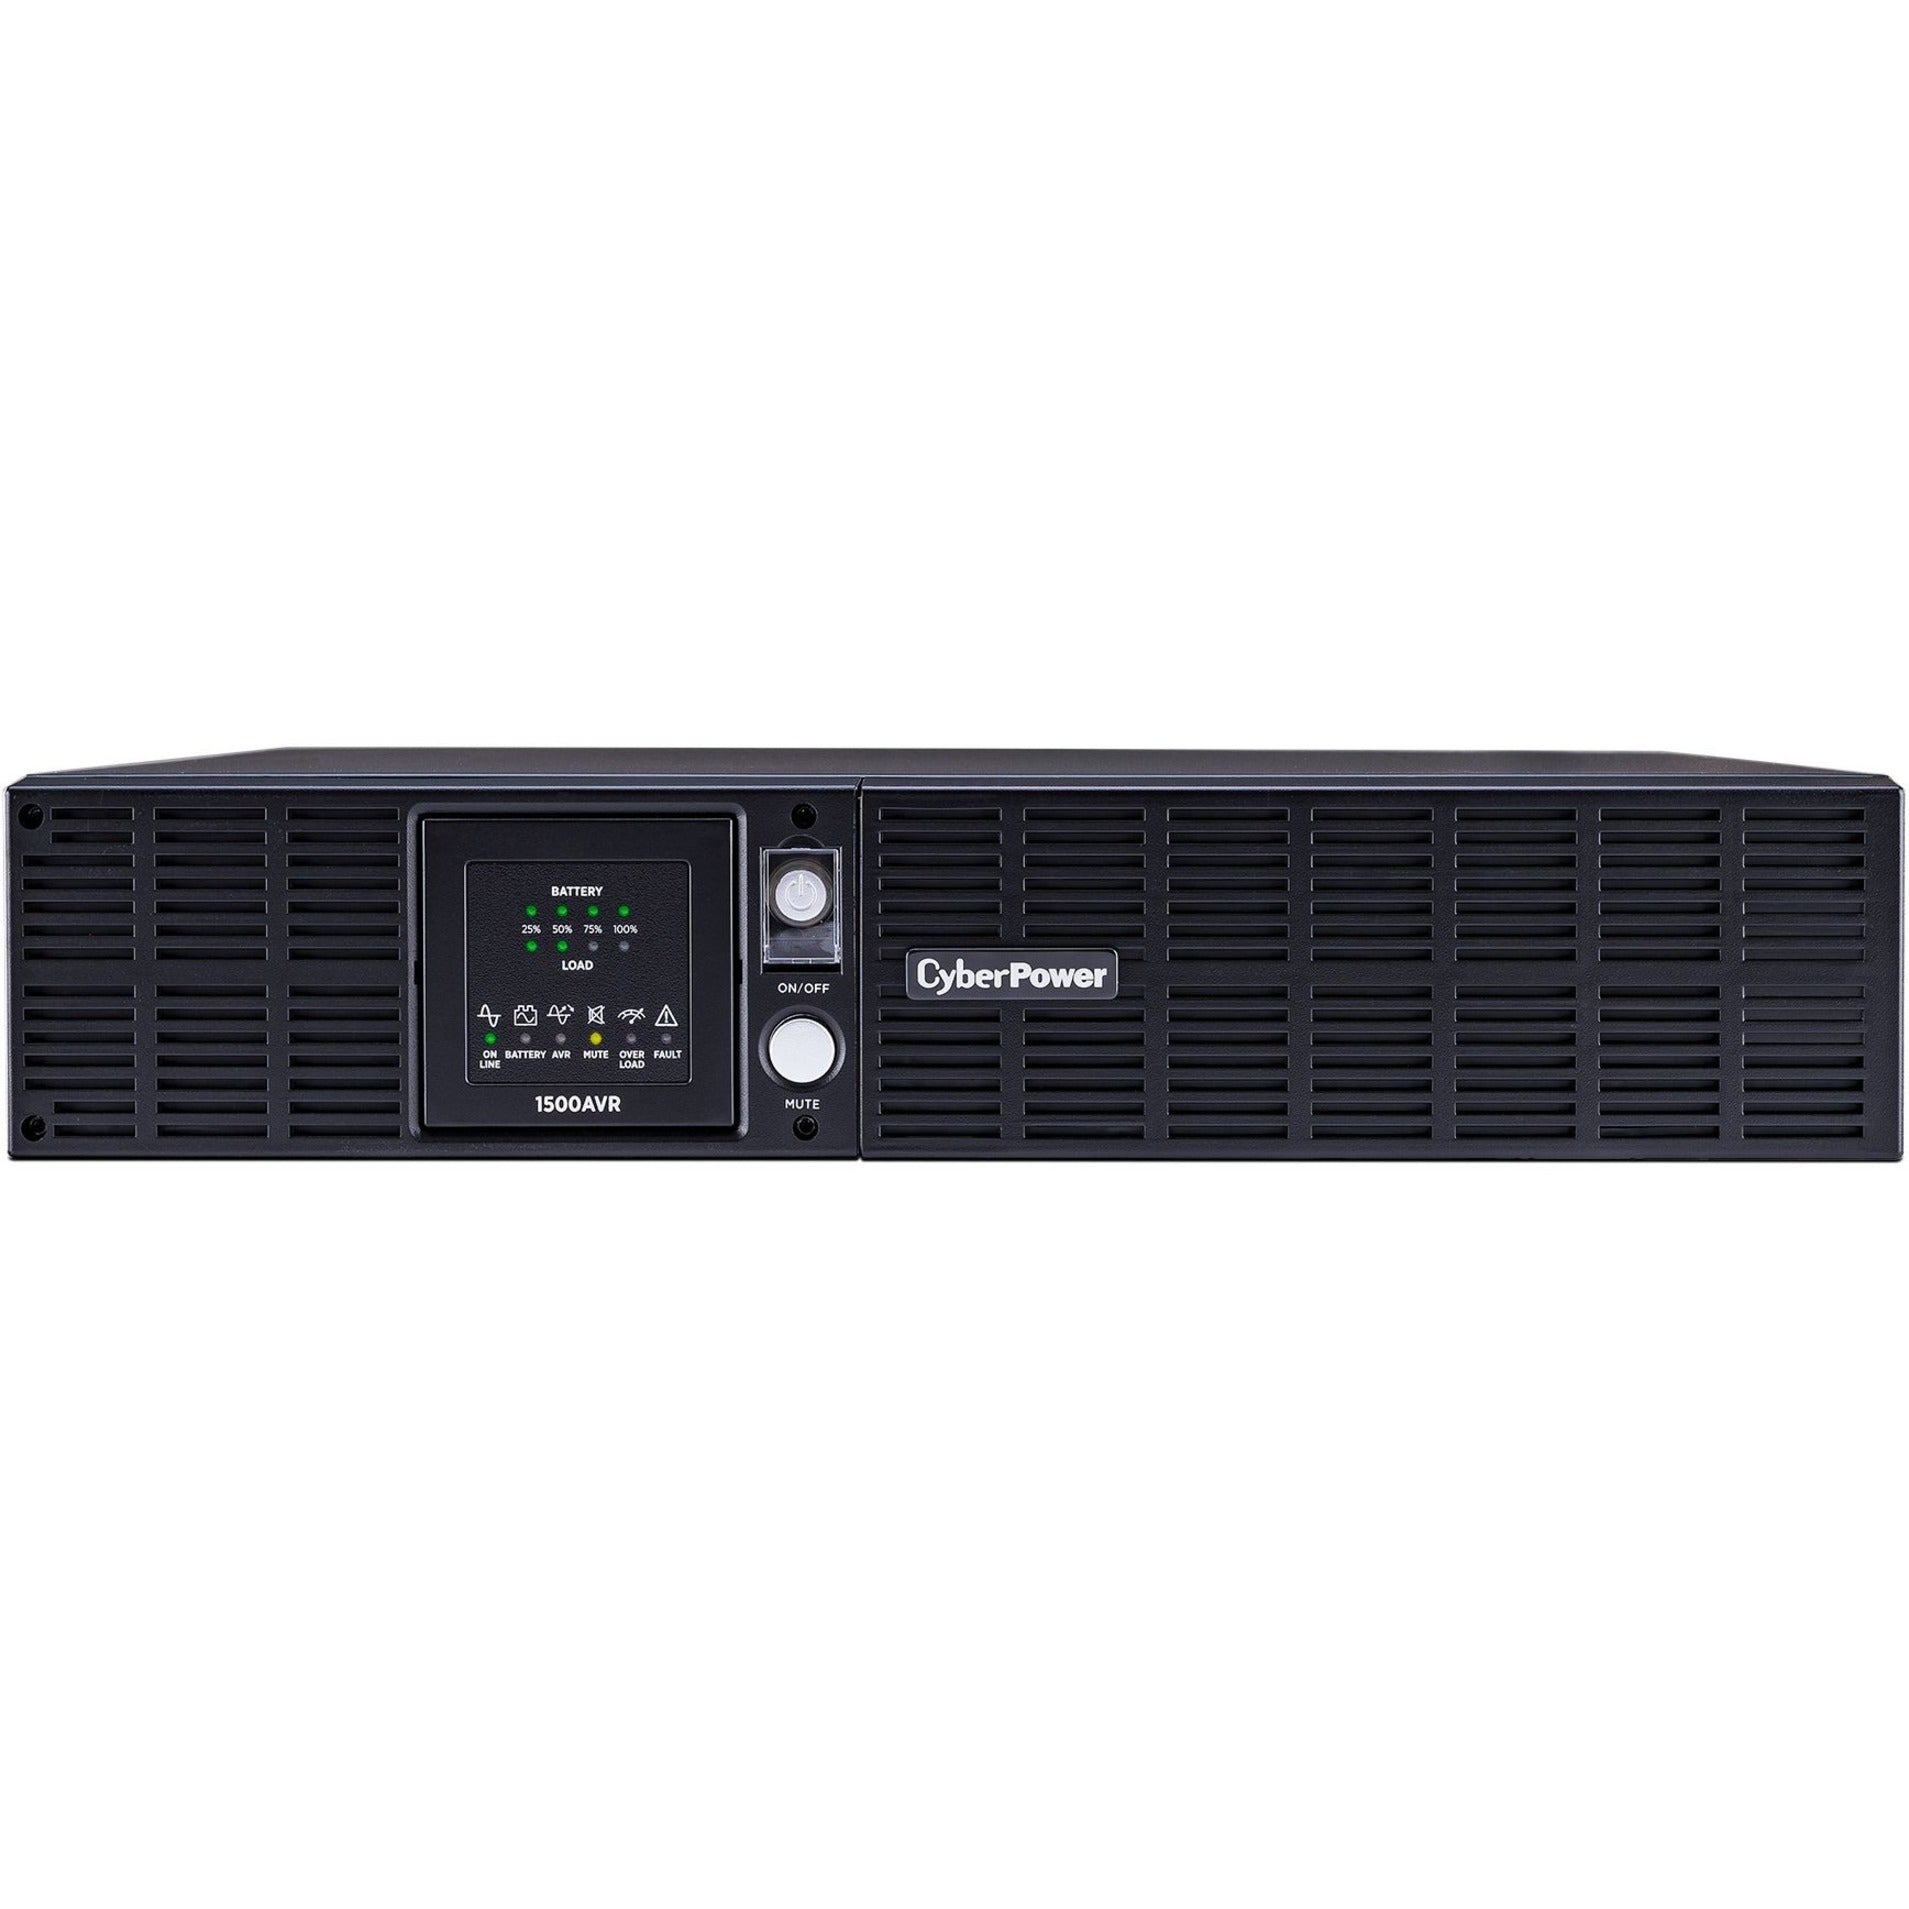 CyberPower CPS1500AVR Smart App LCD UPS Systems, 1500VA Rack/Tower, 3-Year Warranty, Power Management Software